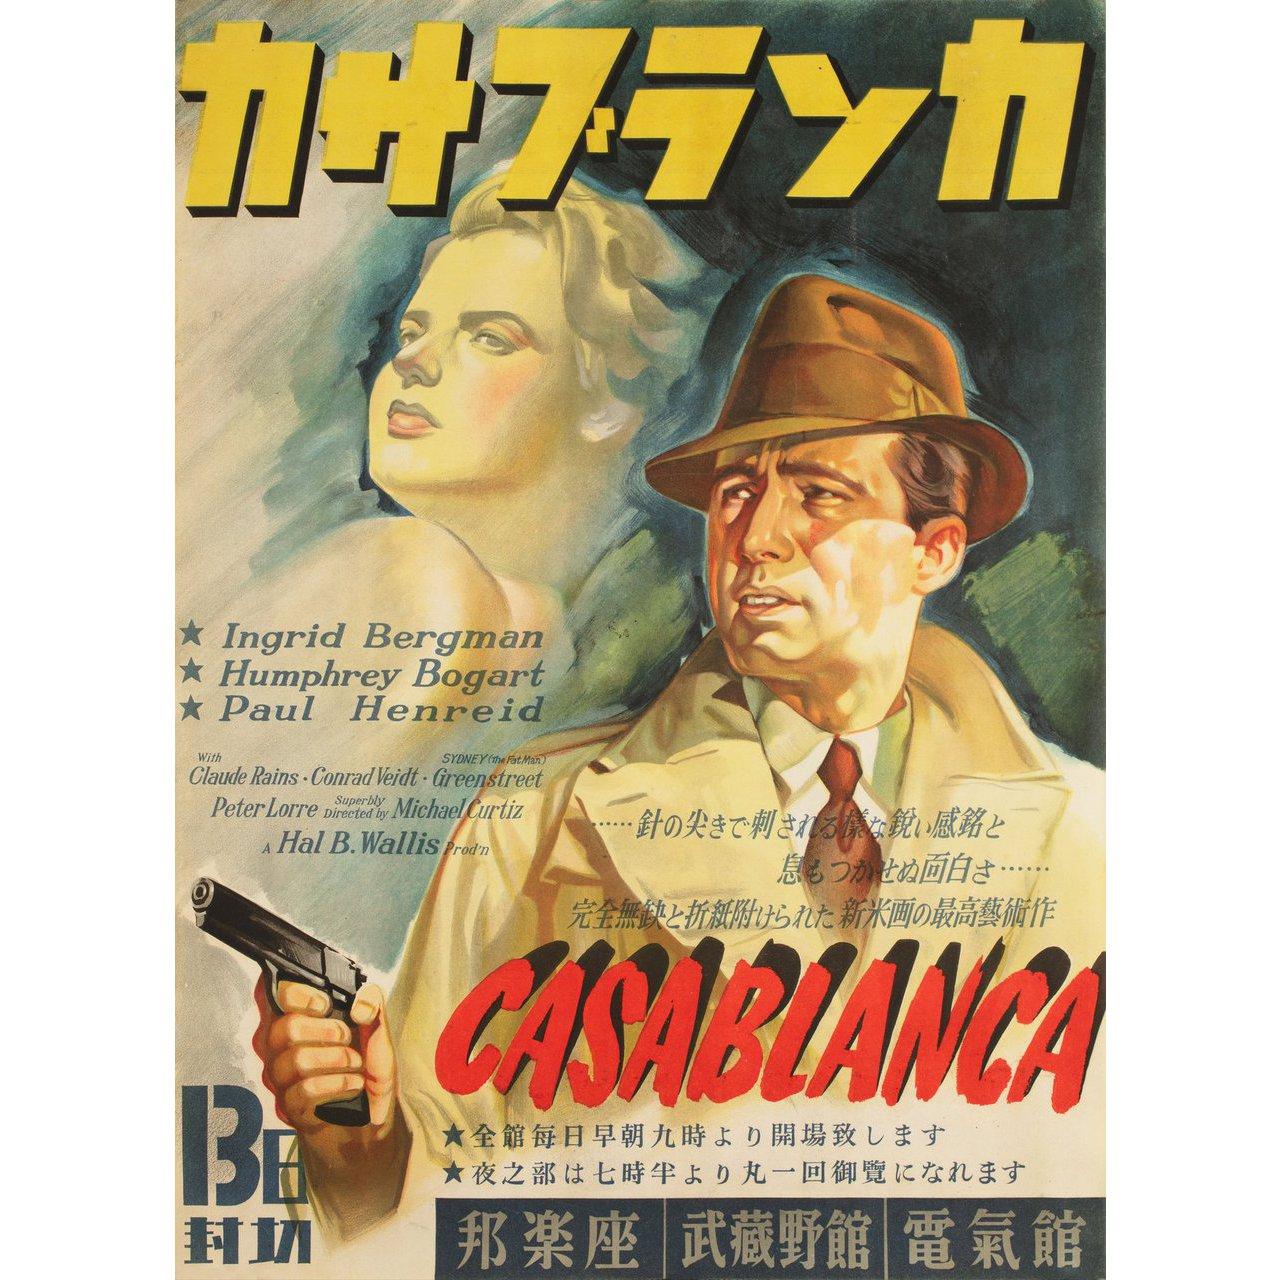 Original 1946 Japanese B3 poster for the 1942 film Casablanca directed by Michael Curtiz with Humphrey Bogart / Ingrid Bergman / Paul Henreid / Claude Rains. Fine condition, rolled. Please note: the size is stated in inches and the actual size can